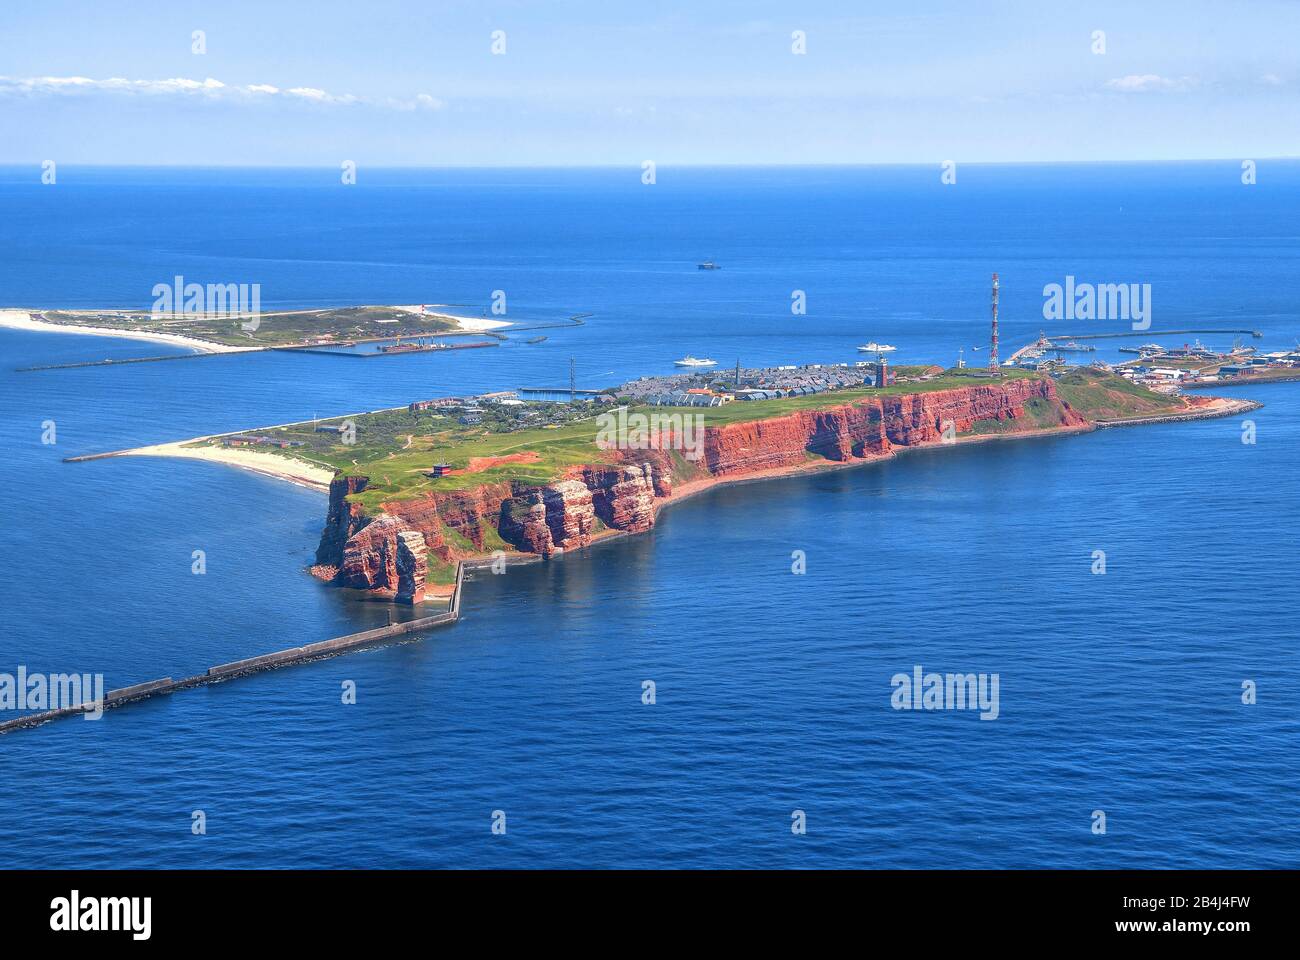 The island with the cliffs of the surf rock Lange Anna and the bath dune of northwest, Heligoland, Heligoland Bay, German Bight, North Sea Island, North Sea, Schleswig-Holstein, Germany Stock Photo